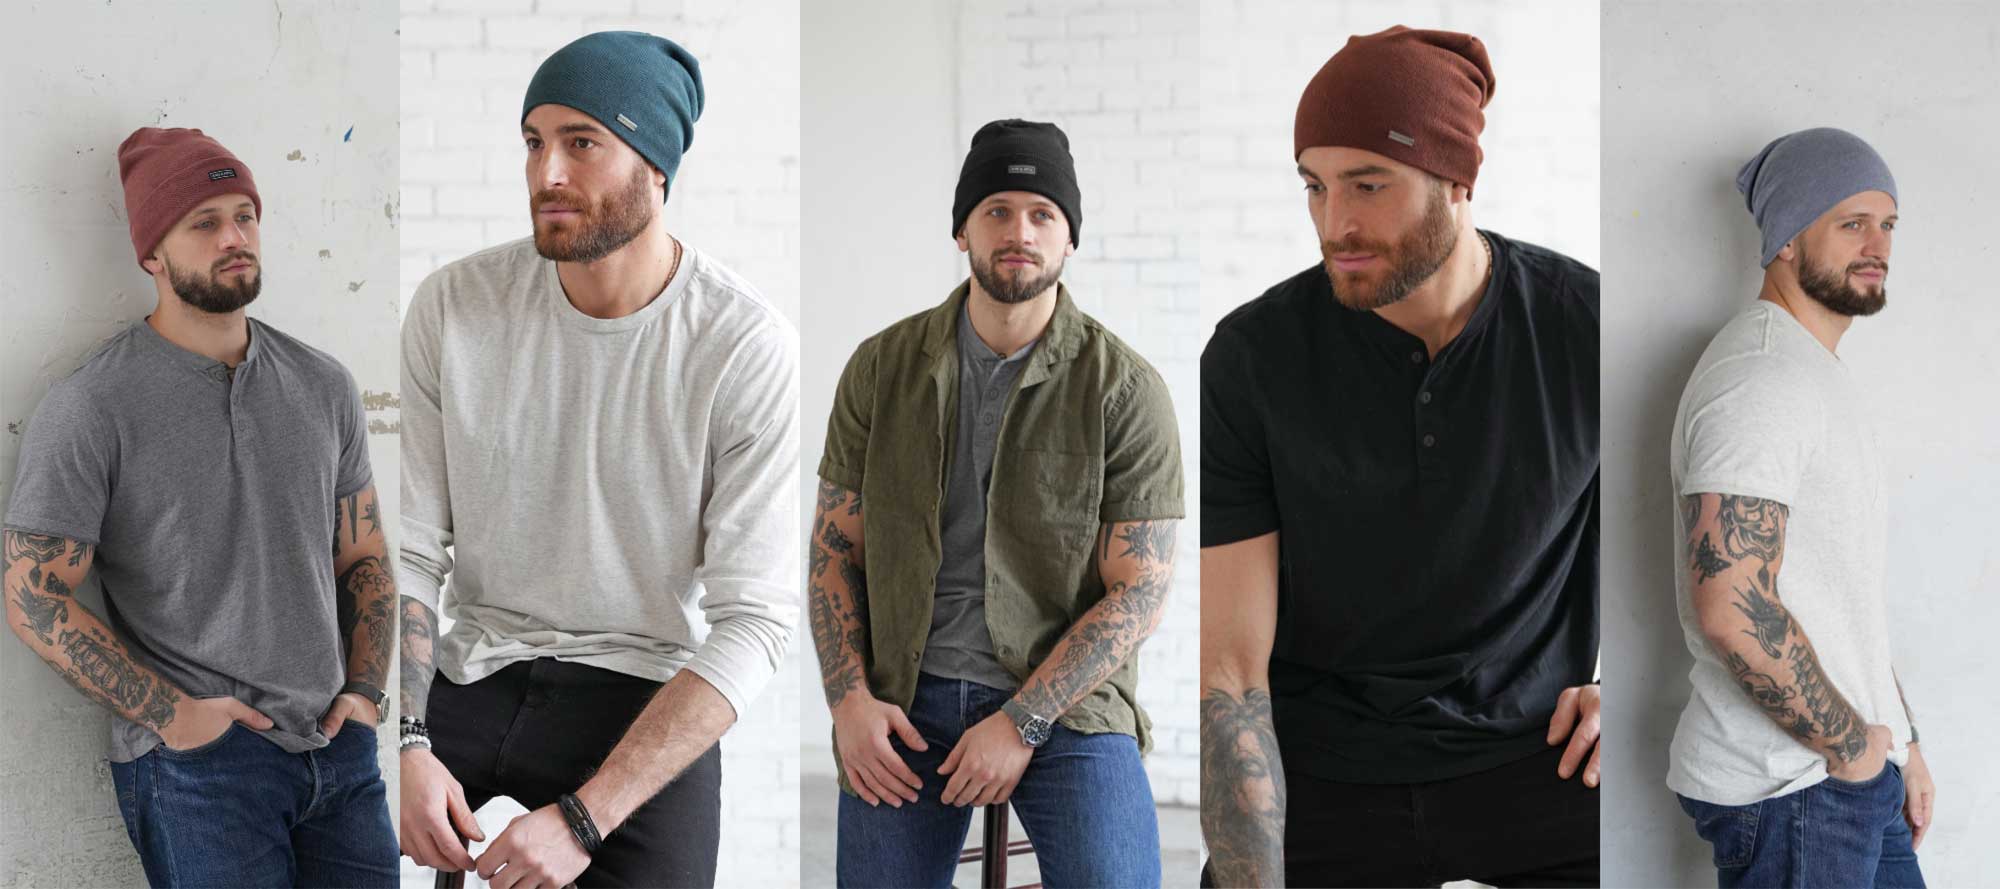 HOW TO STYLE SUMMER BEANIES?